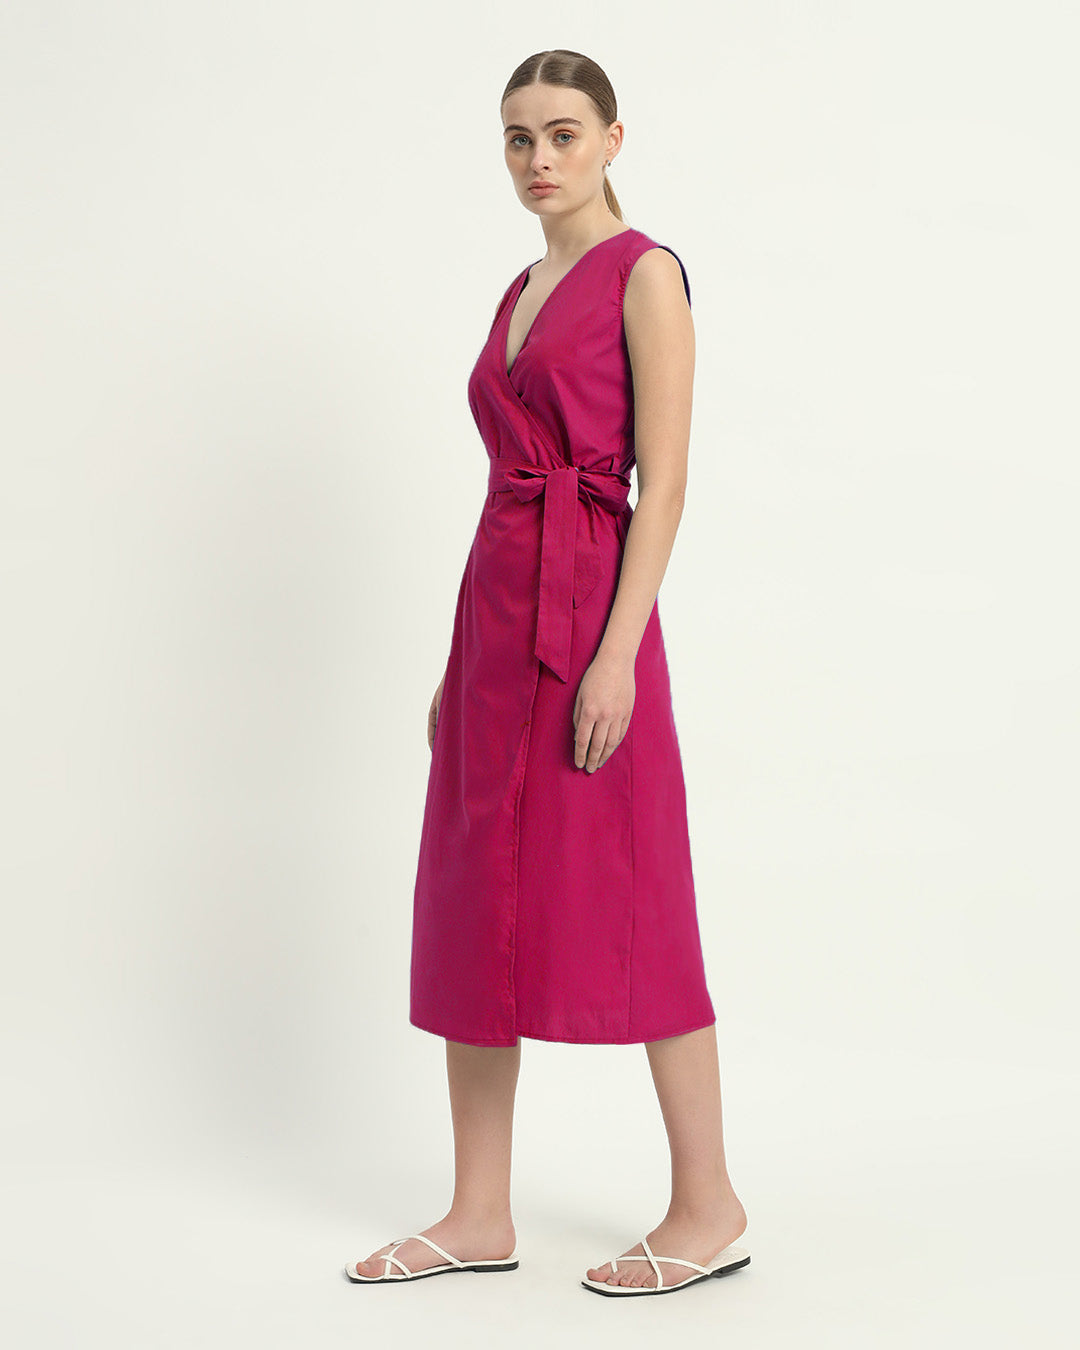 The Windsor Berry Cotton Dress